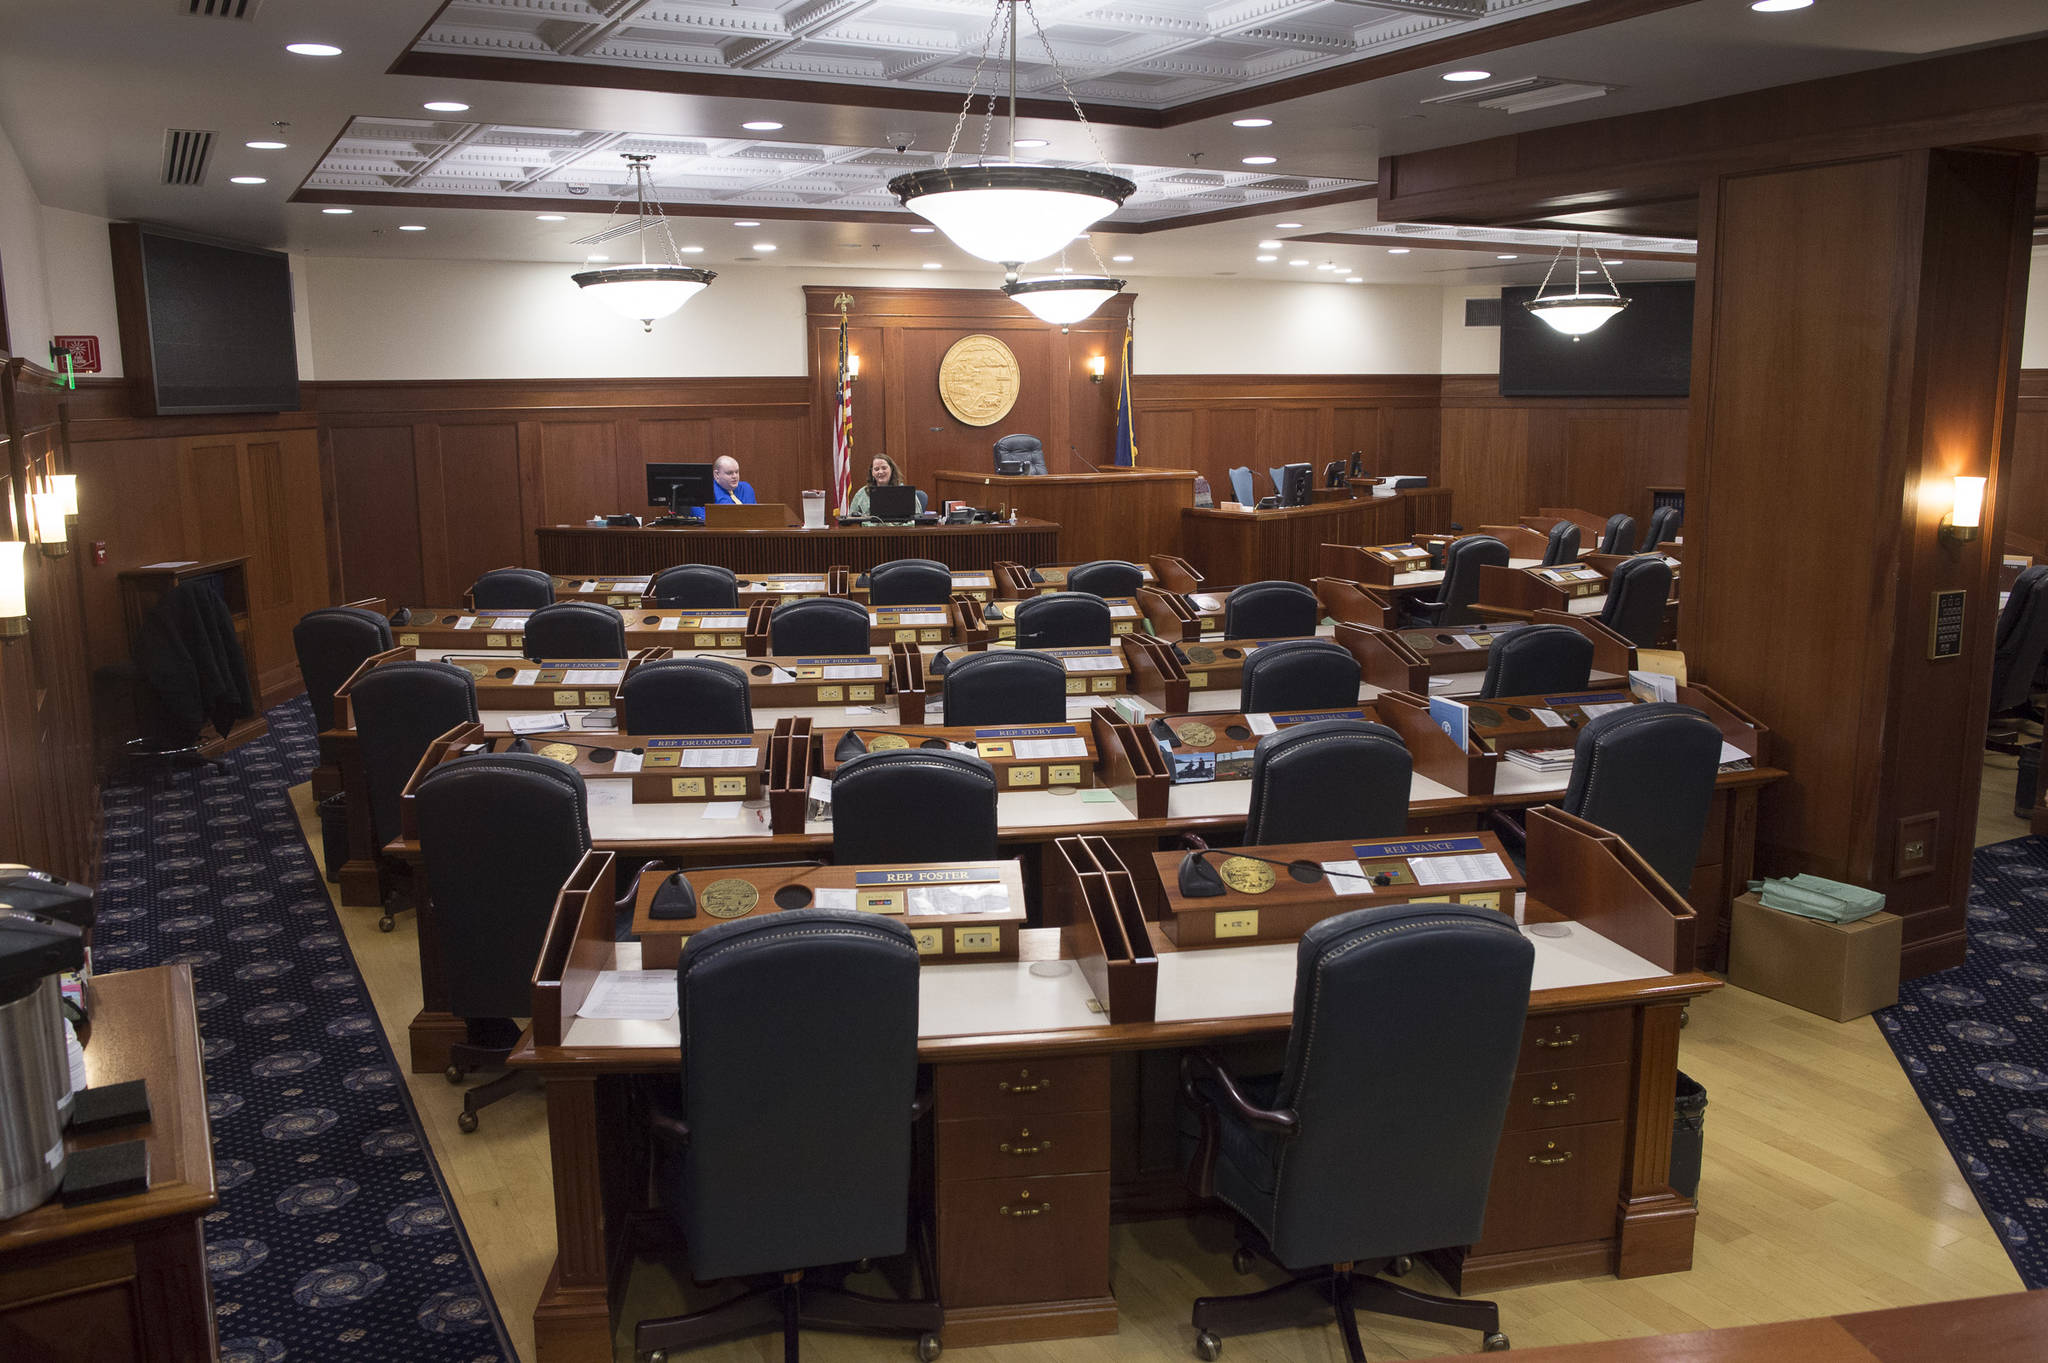 Leadership remains unsolved in the House of Representatives on Friday, Jan. 25, 2019. (Michael Penn | Juneau Empire)                                Leadership remains unsolved in the House of Representatives on Friday, Jan. 25, 2019. (Michael Penn | Juneau Empire)